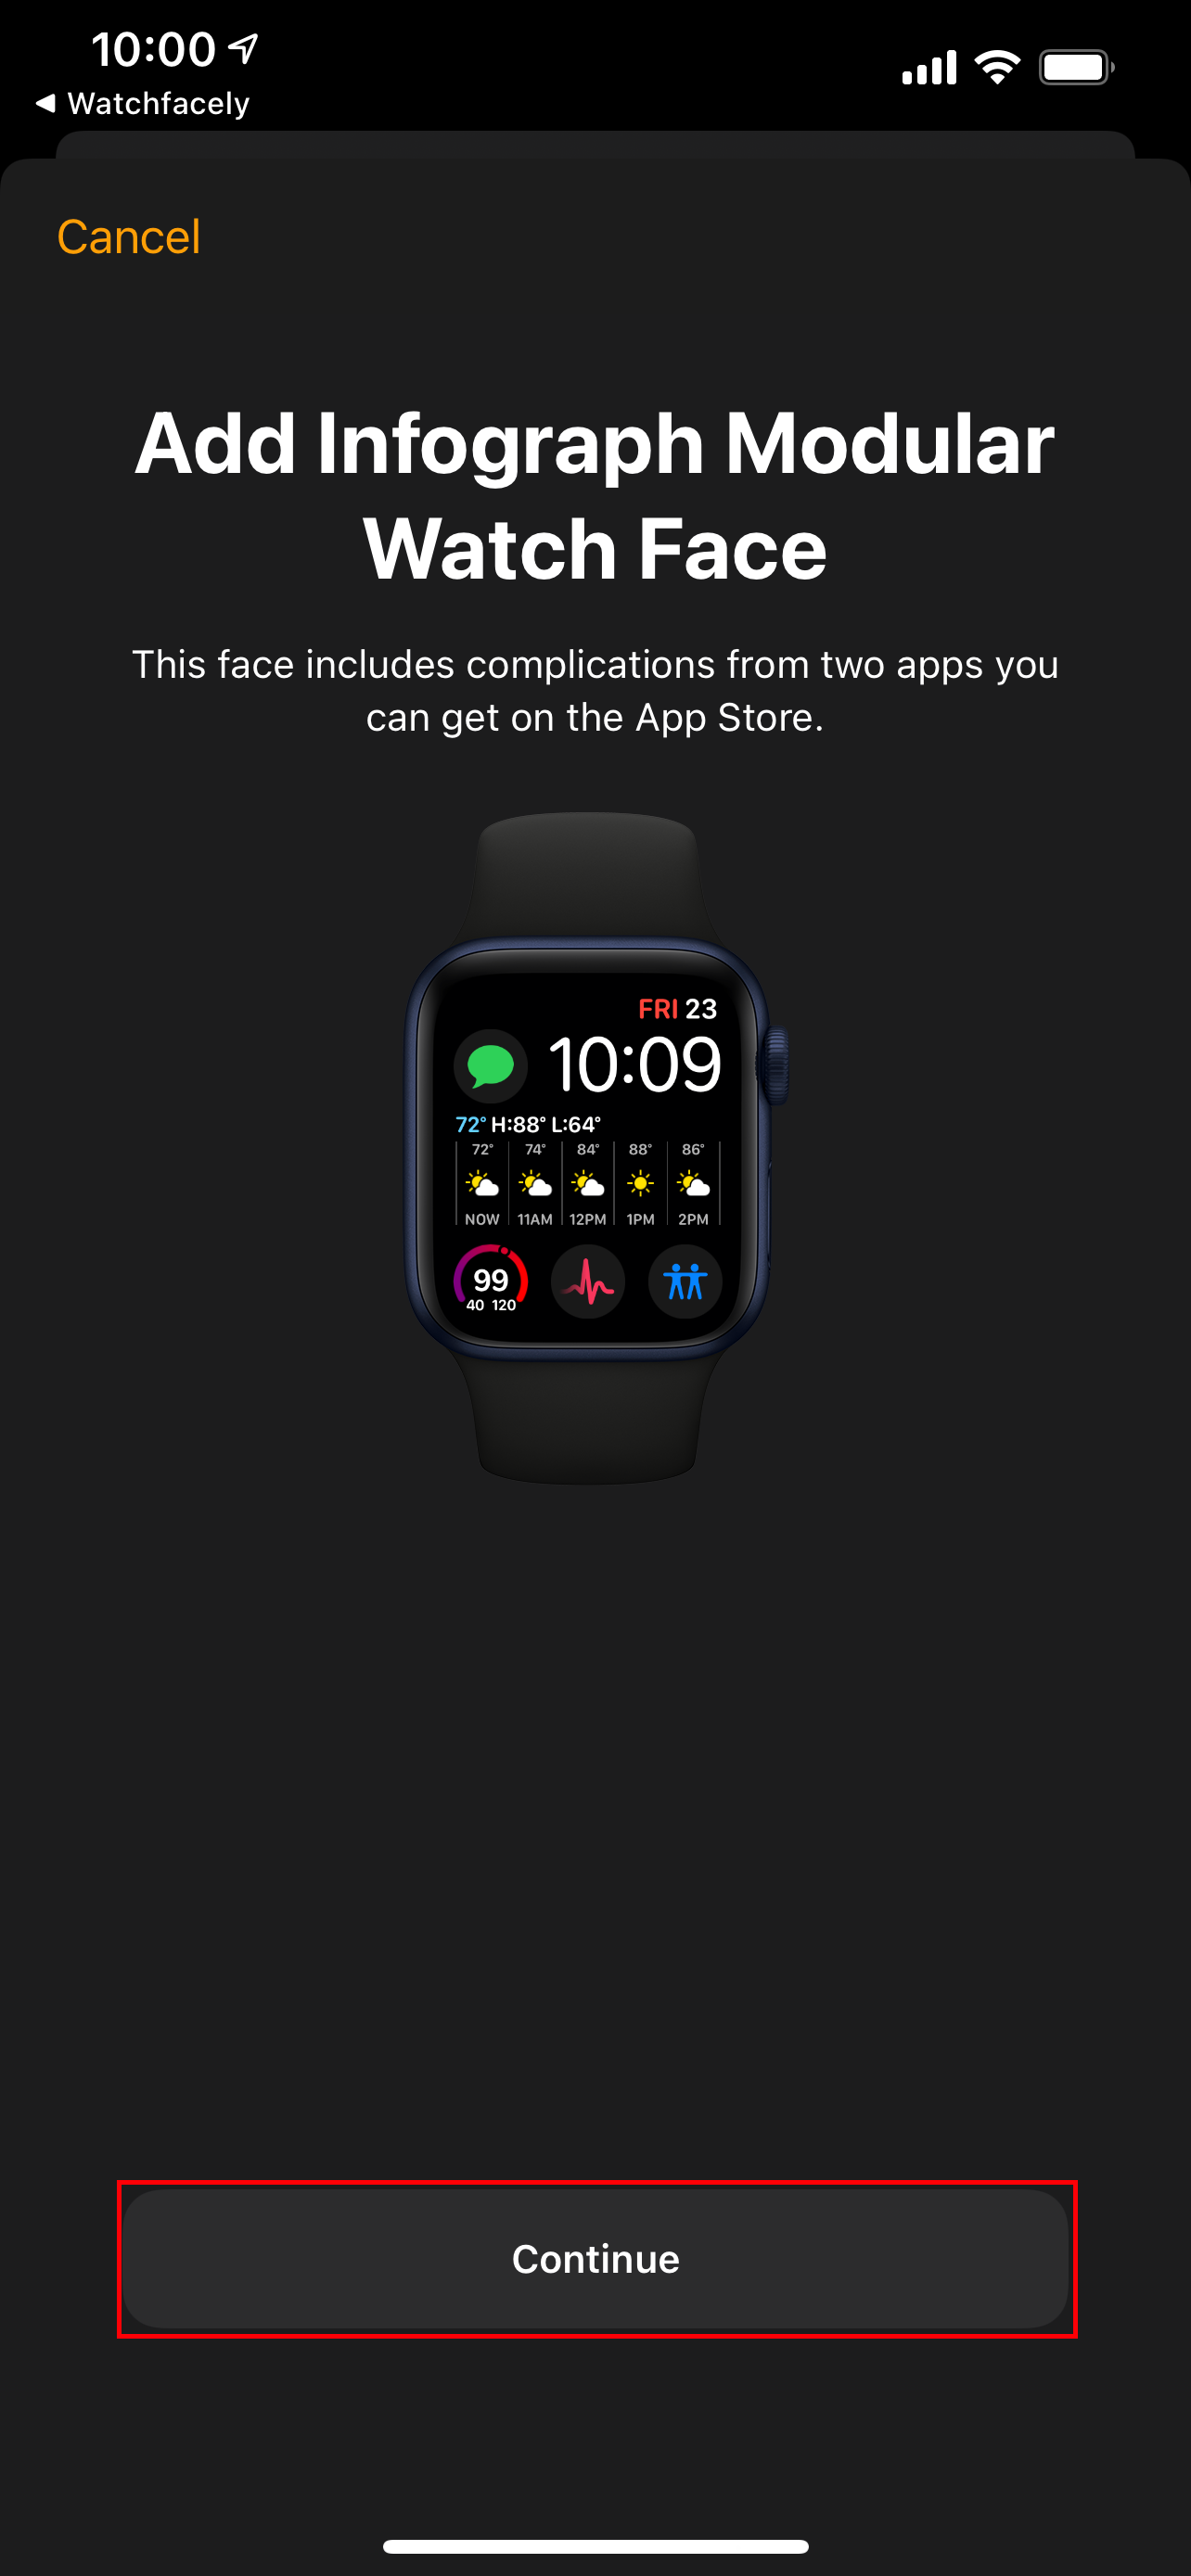 confirm watch face download